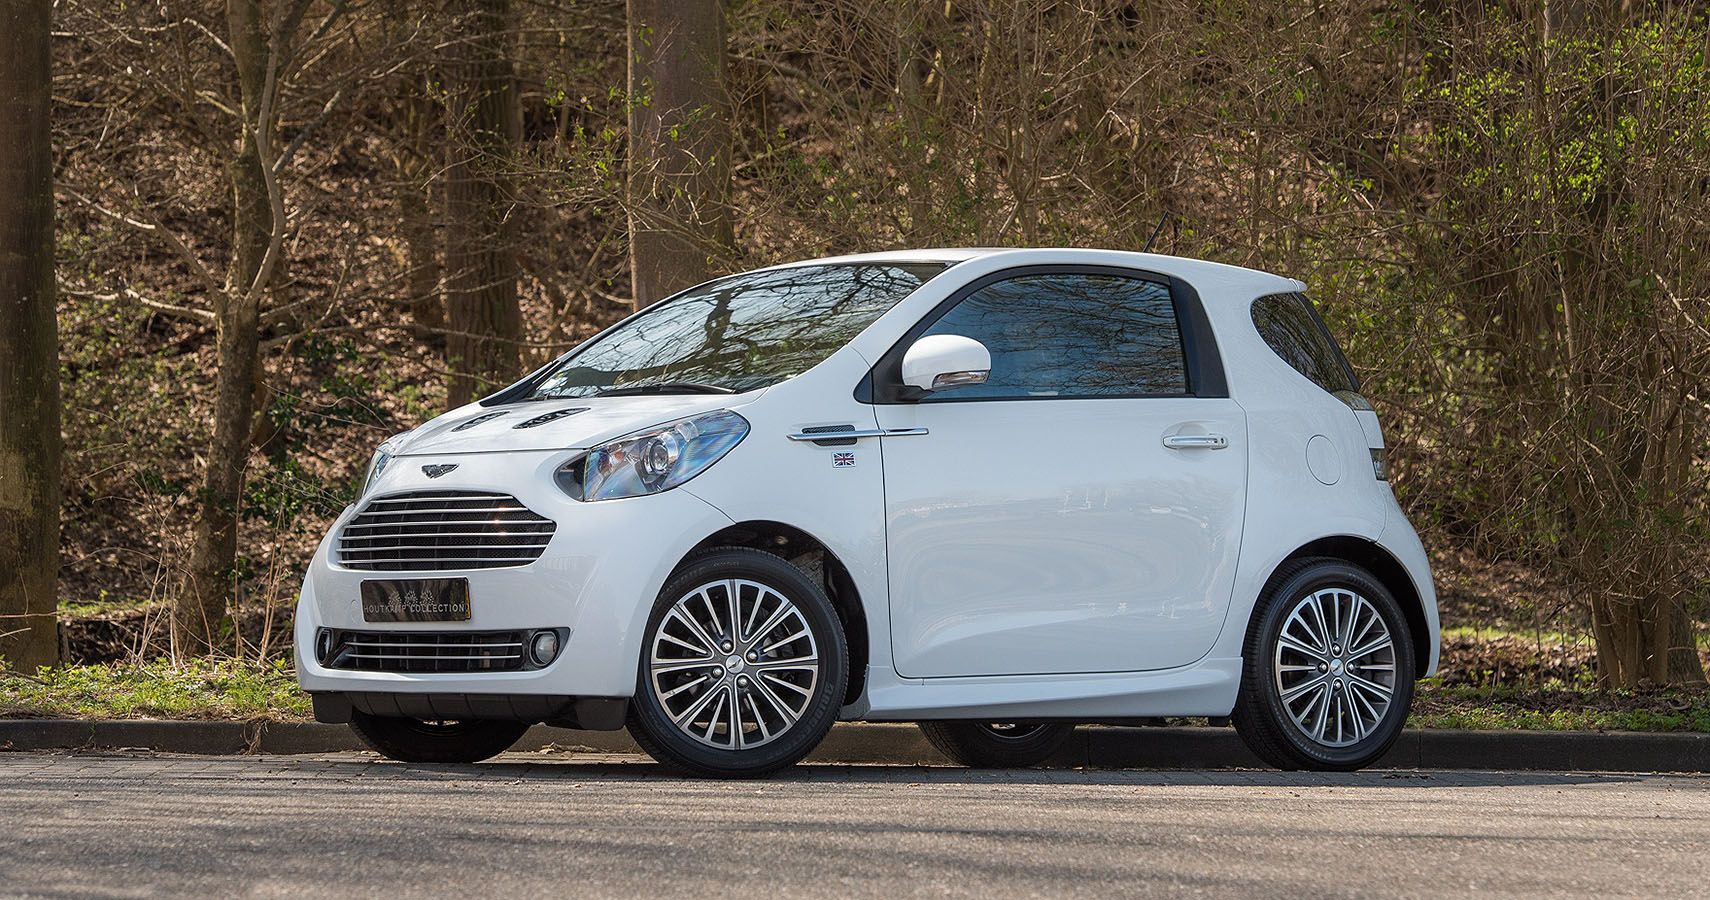 2011-2013 Aston Martin Cygnet: Overpriced, Overhyped, And Finally Over